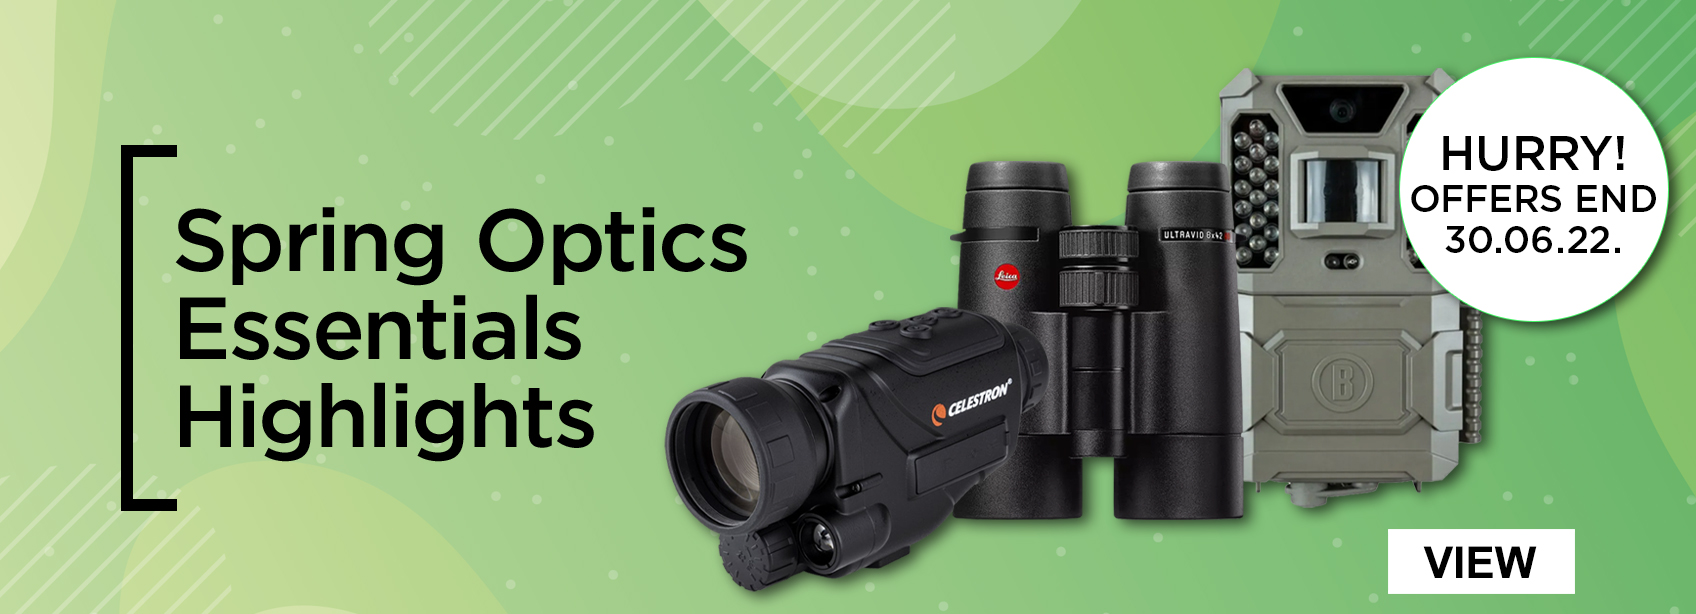 Spring Essentials | Our widest range of Spring OPtics Offers Ends Soon | Hurry!